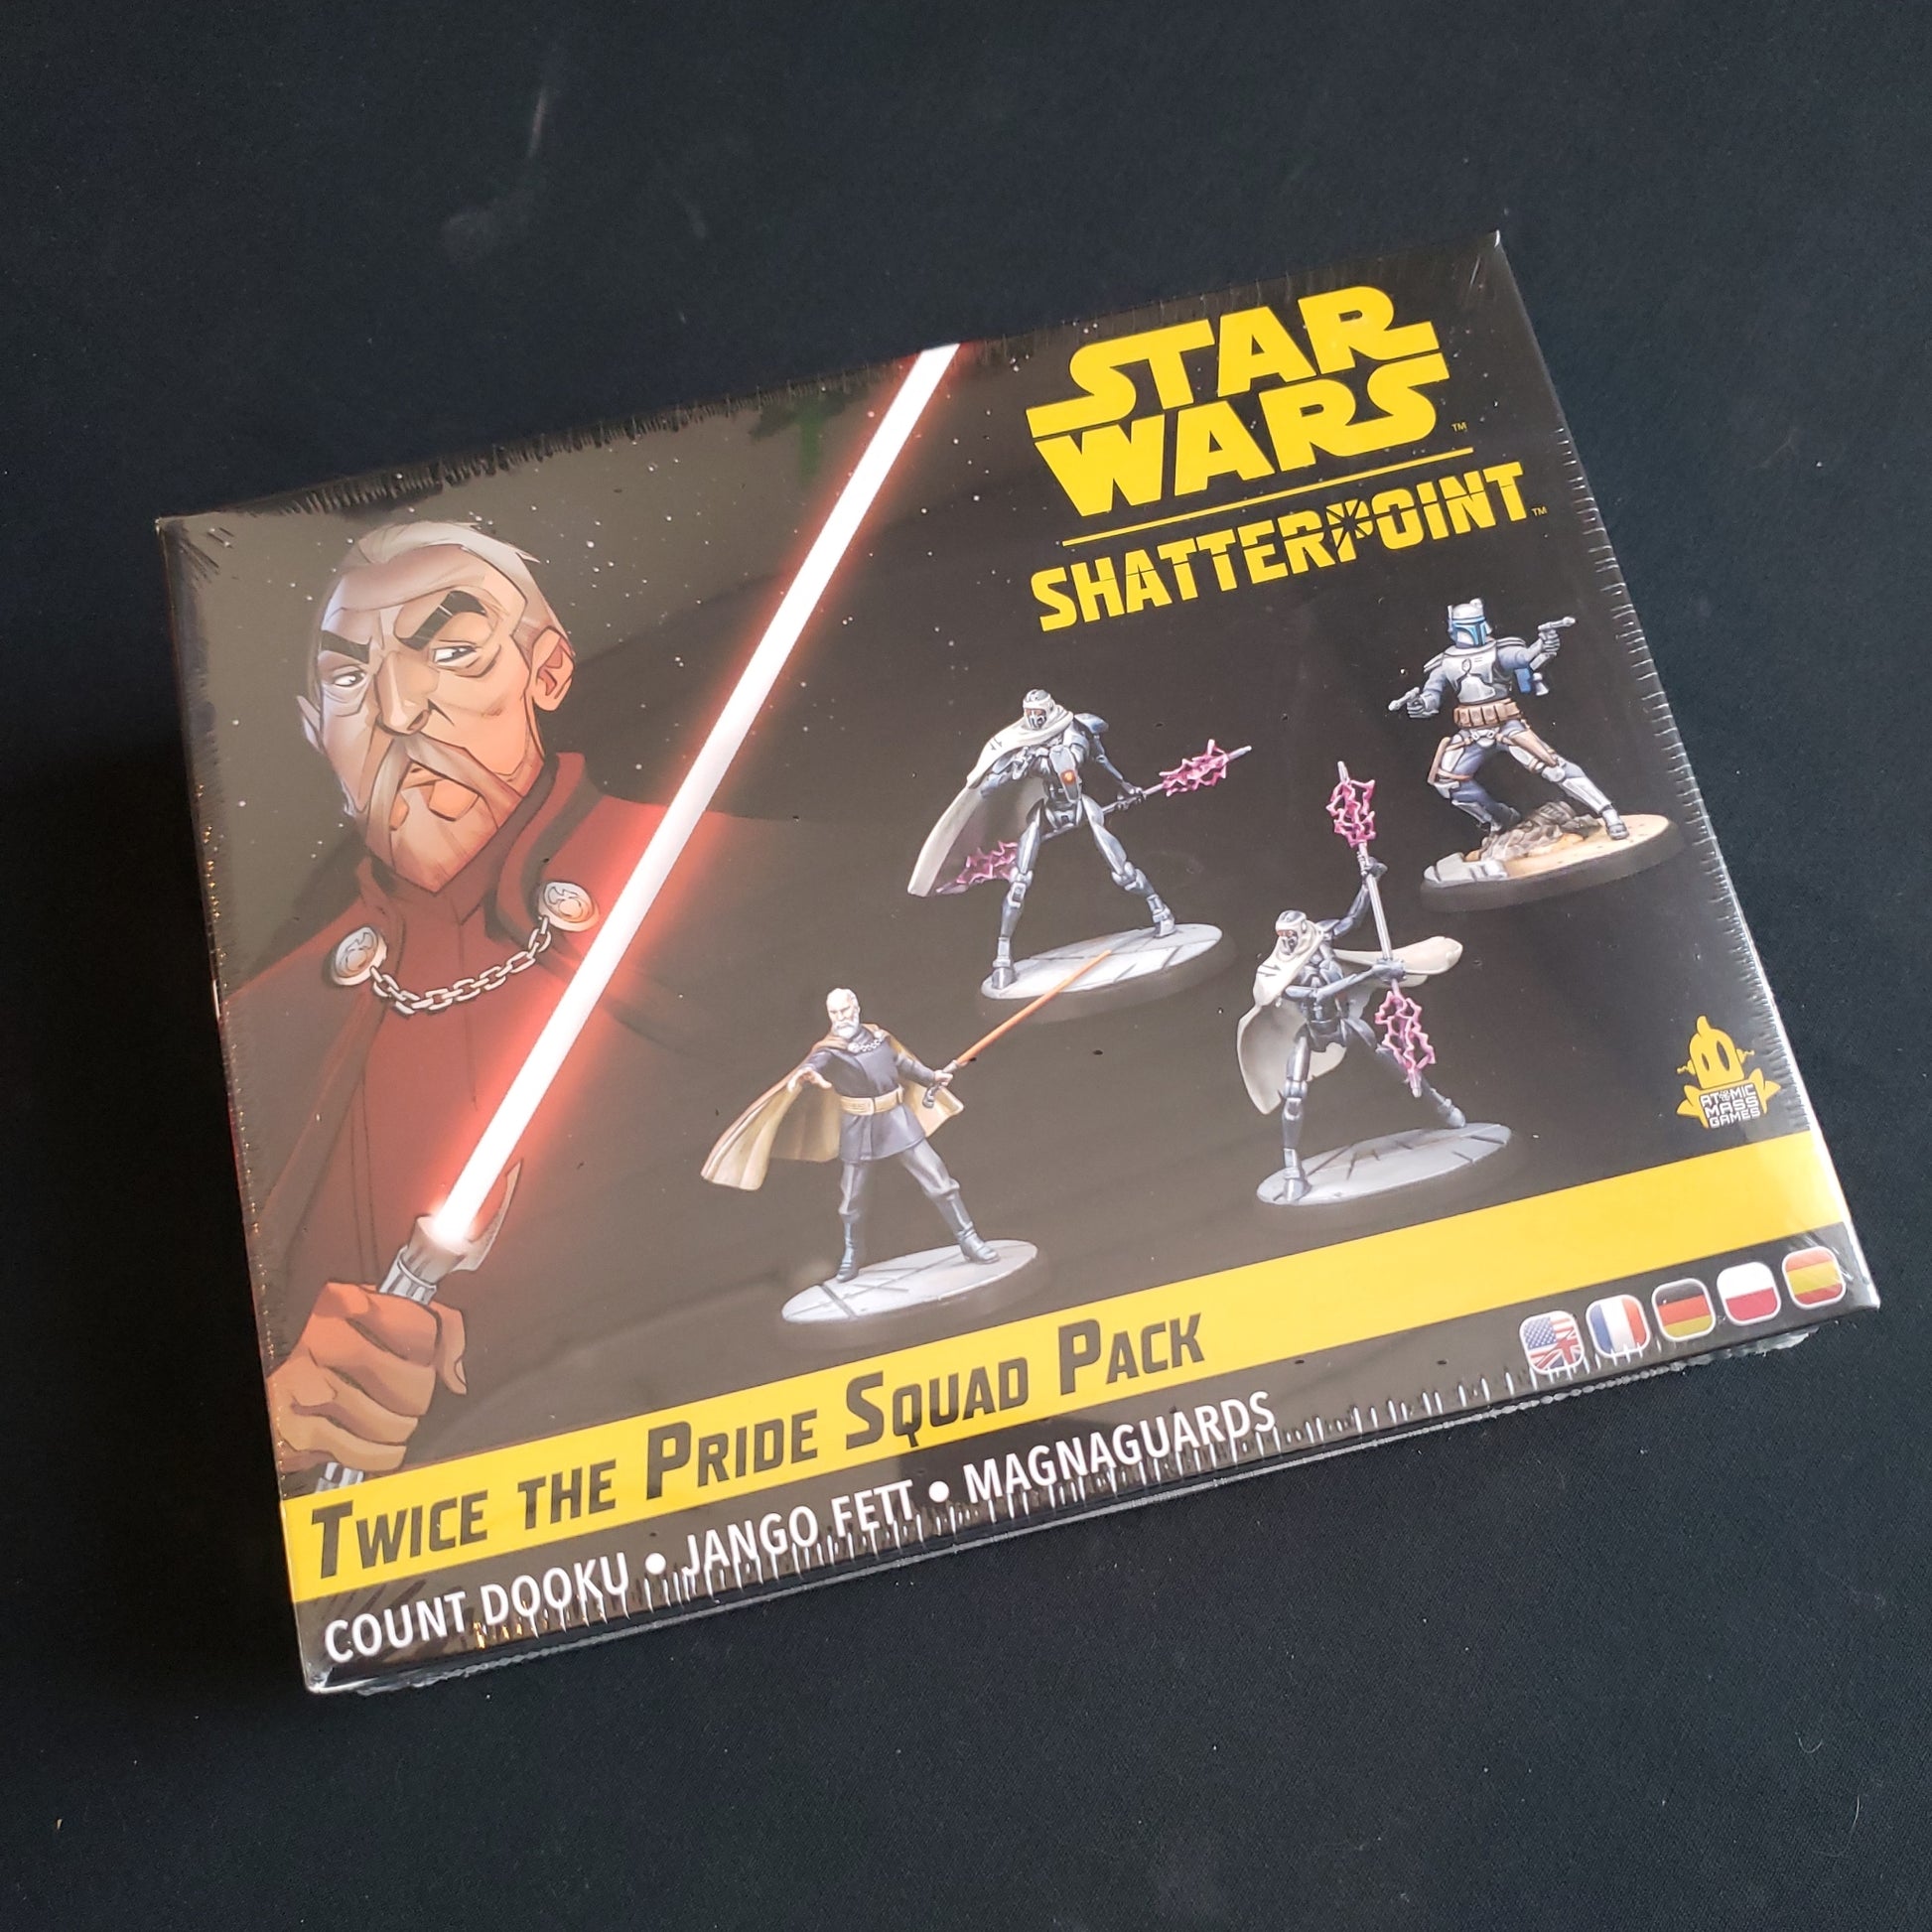 Image shows the front of the box for the Twice the Pride Squad Pack expansion for the board game Star Wars: Shatterpoint